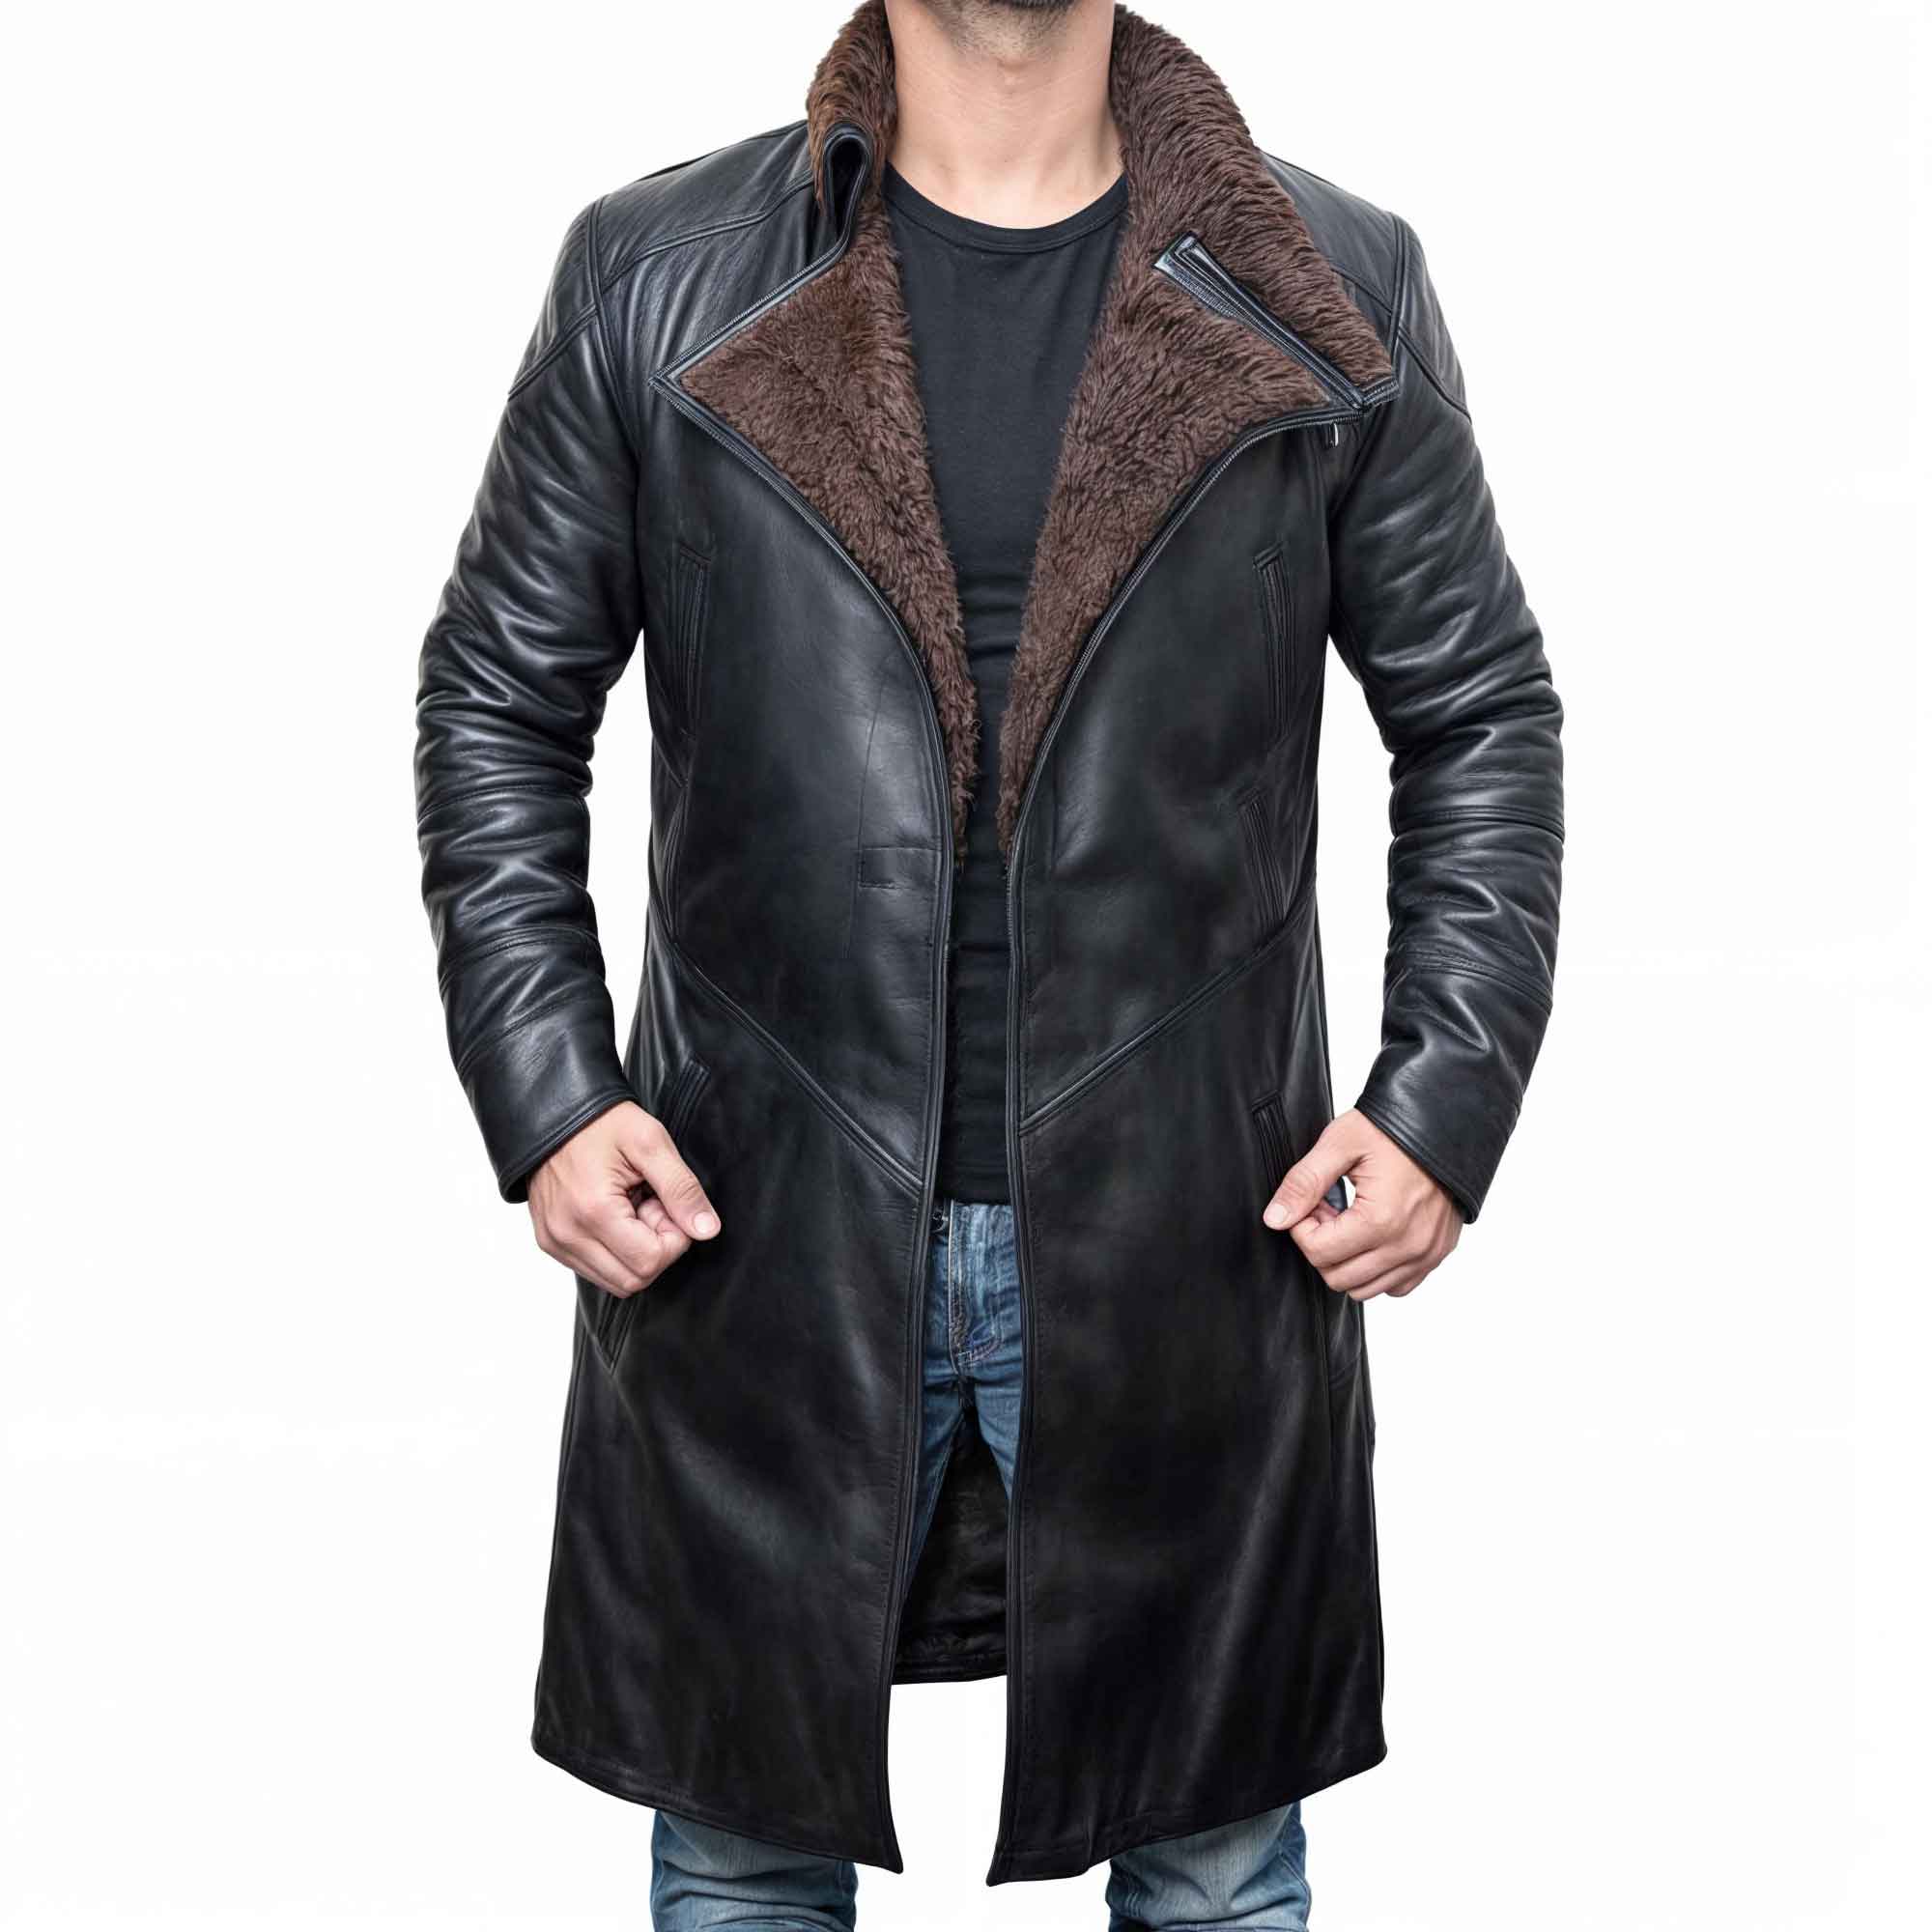 Black Shearling Trench Coat for Men's - Front Open View